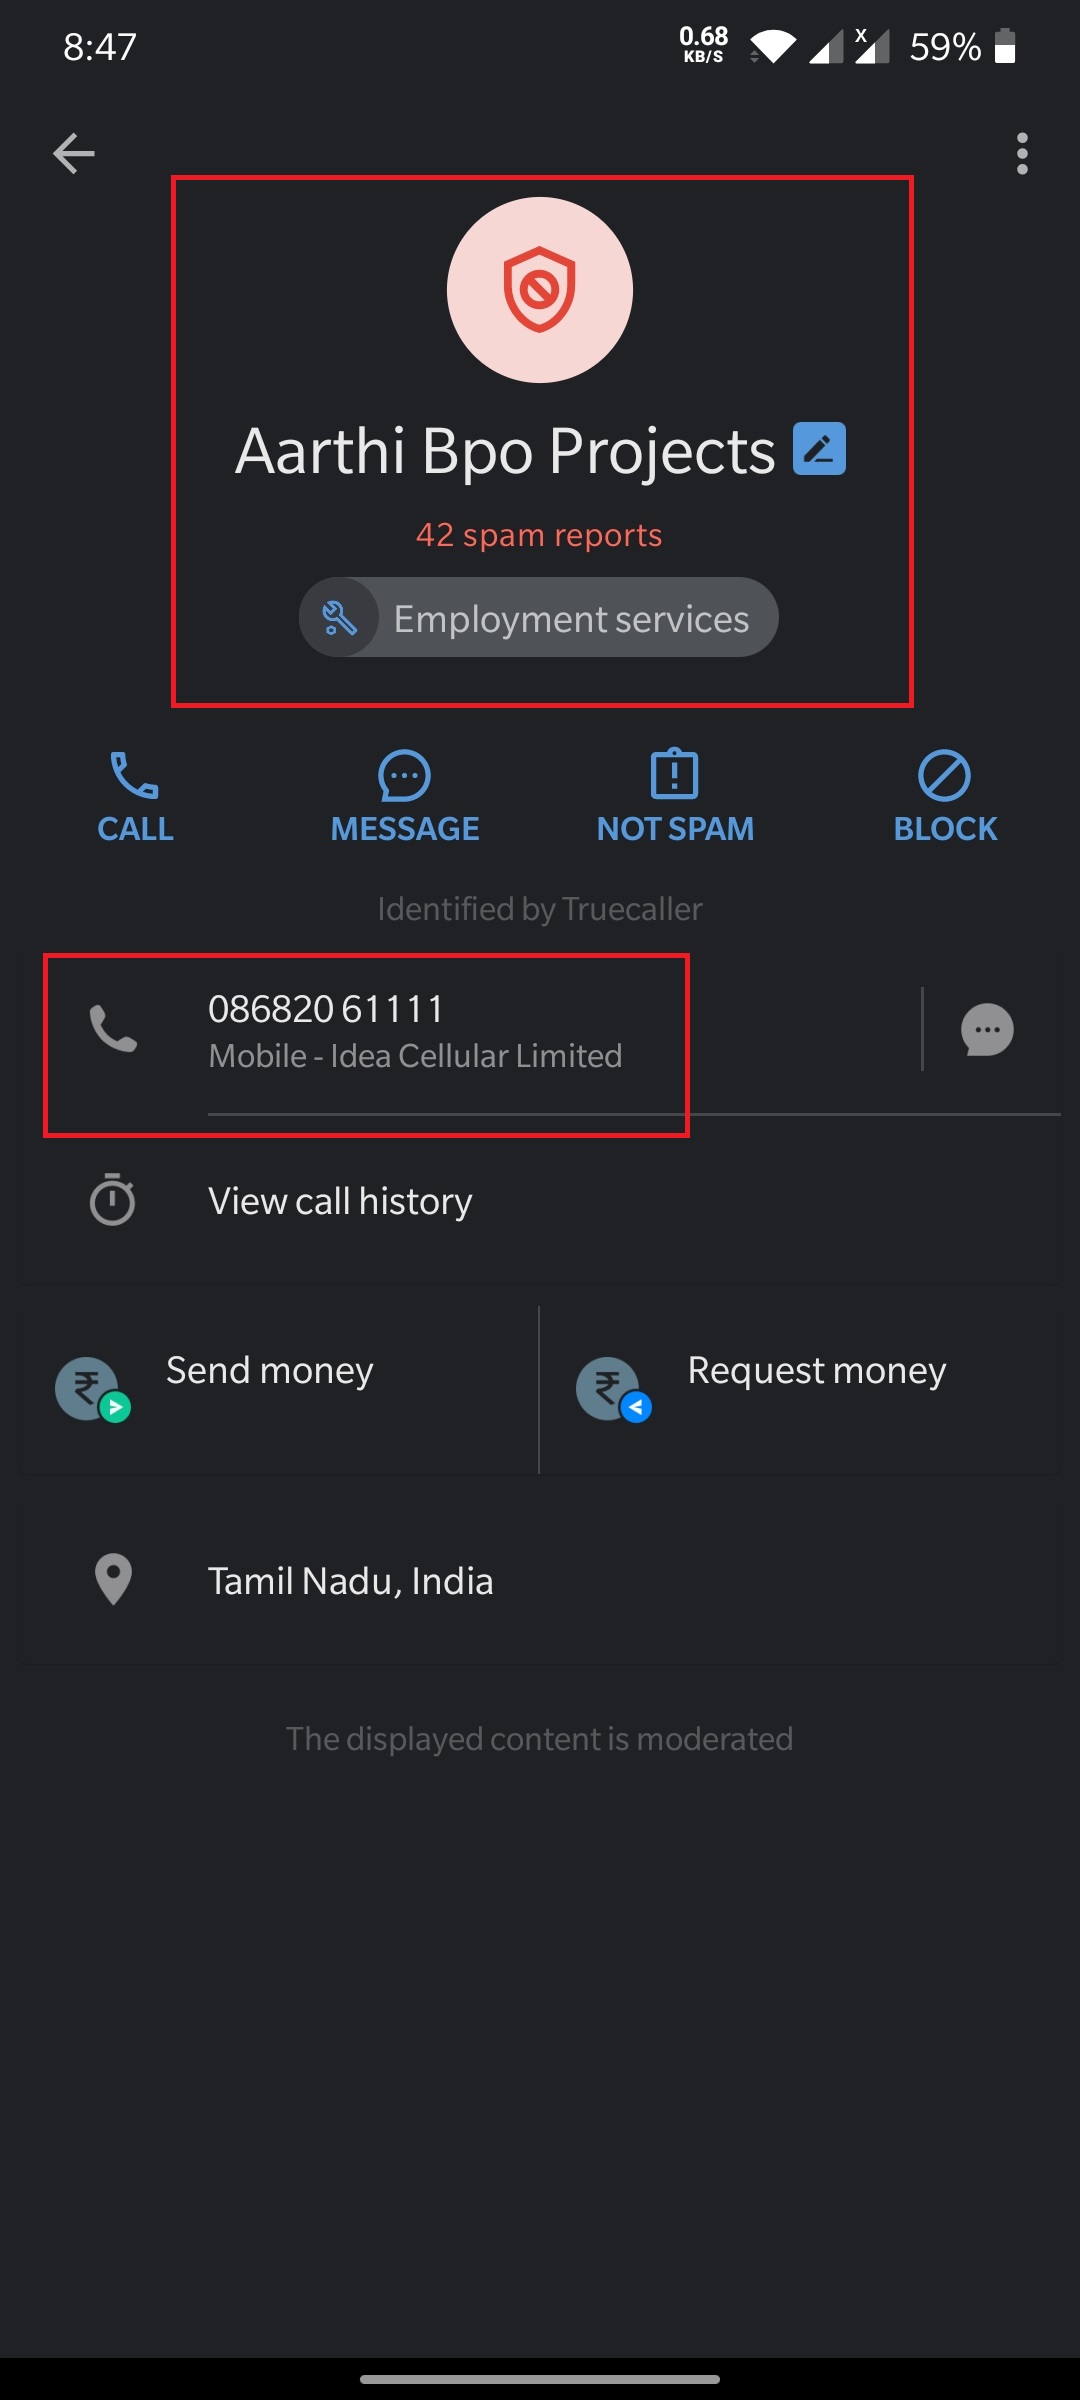 bpo projects provider india phone number truecaller spam 3